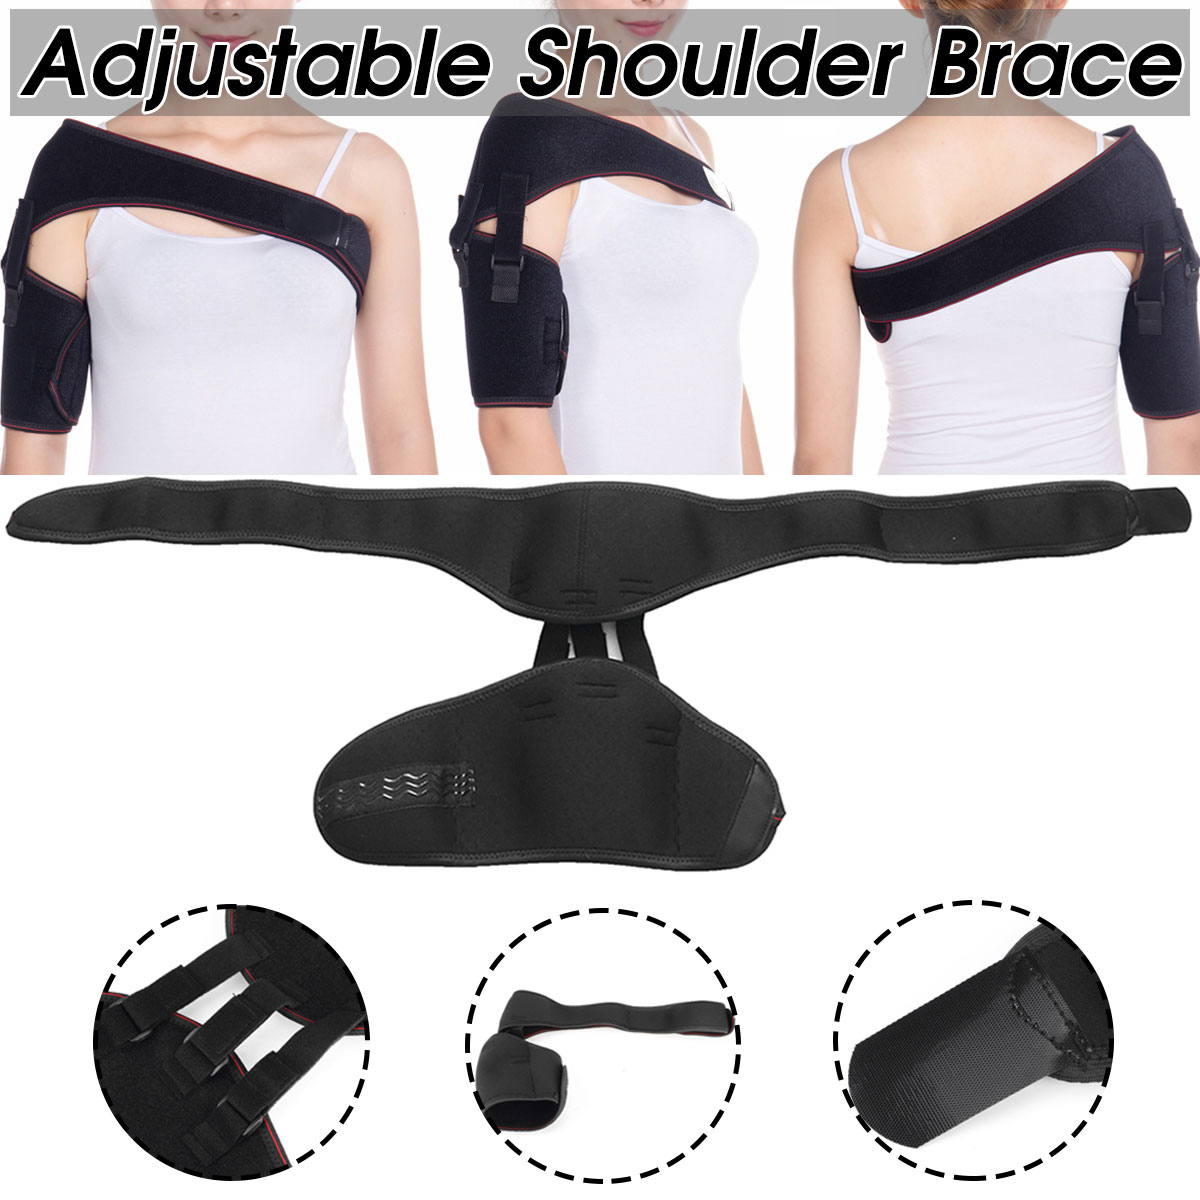 1Pcs-Adjustable-Shoulder-Support-Brace-Fixing-Strap-Protector-Sports-Training-Protective-Gear-1549844-1